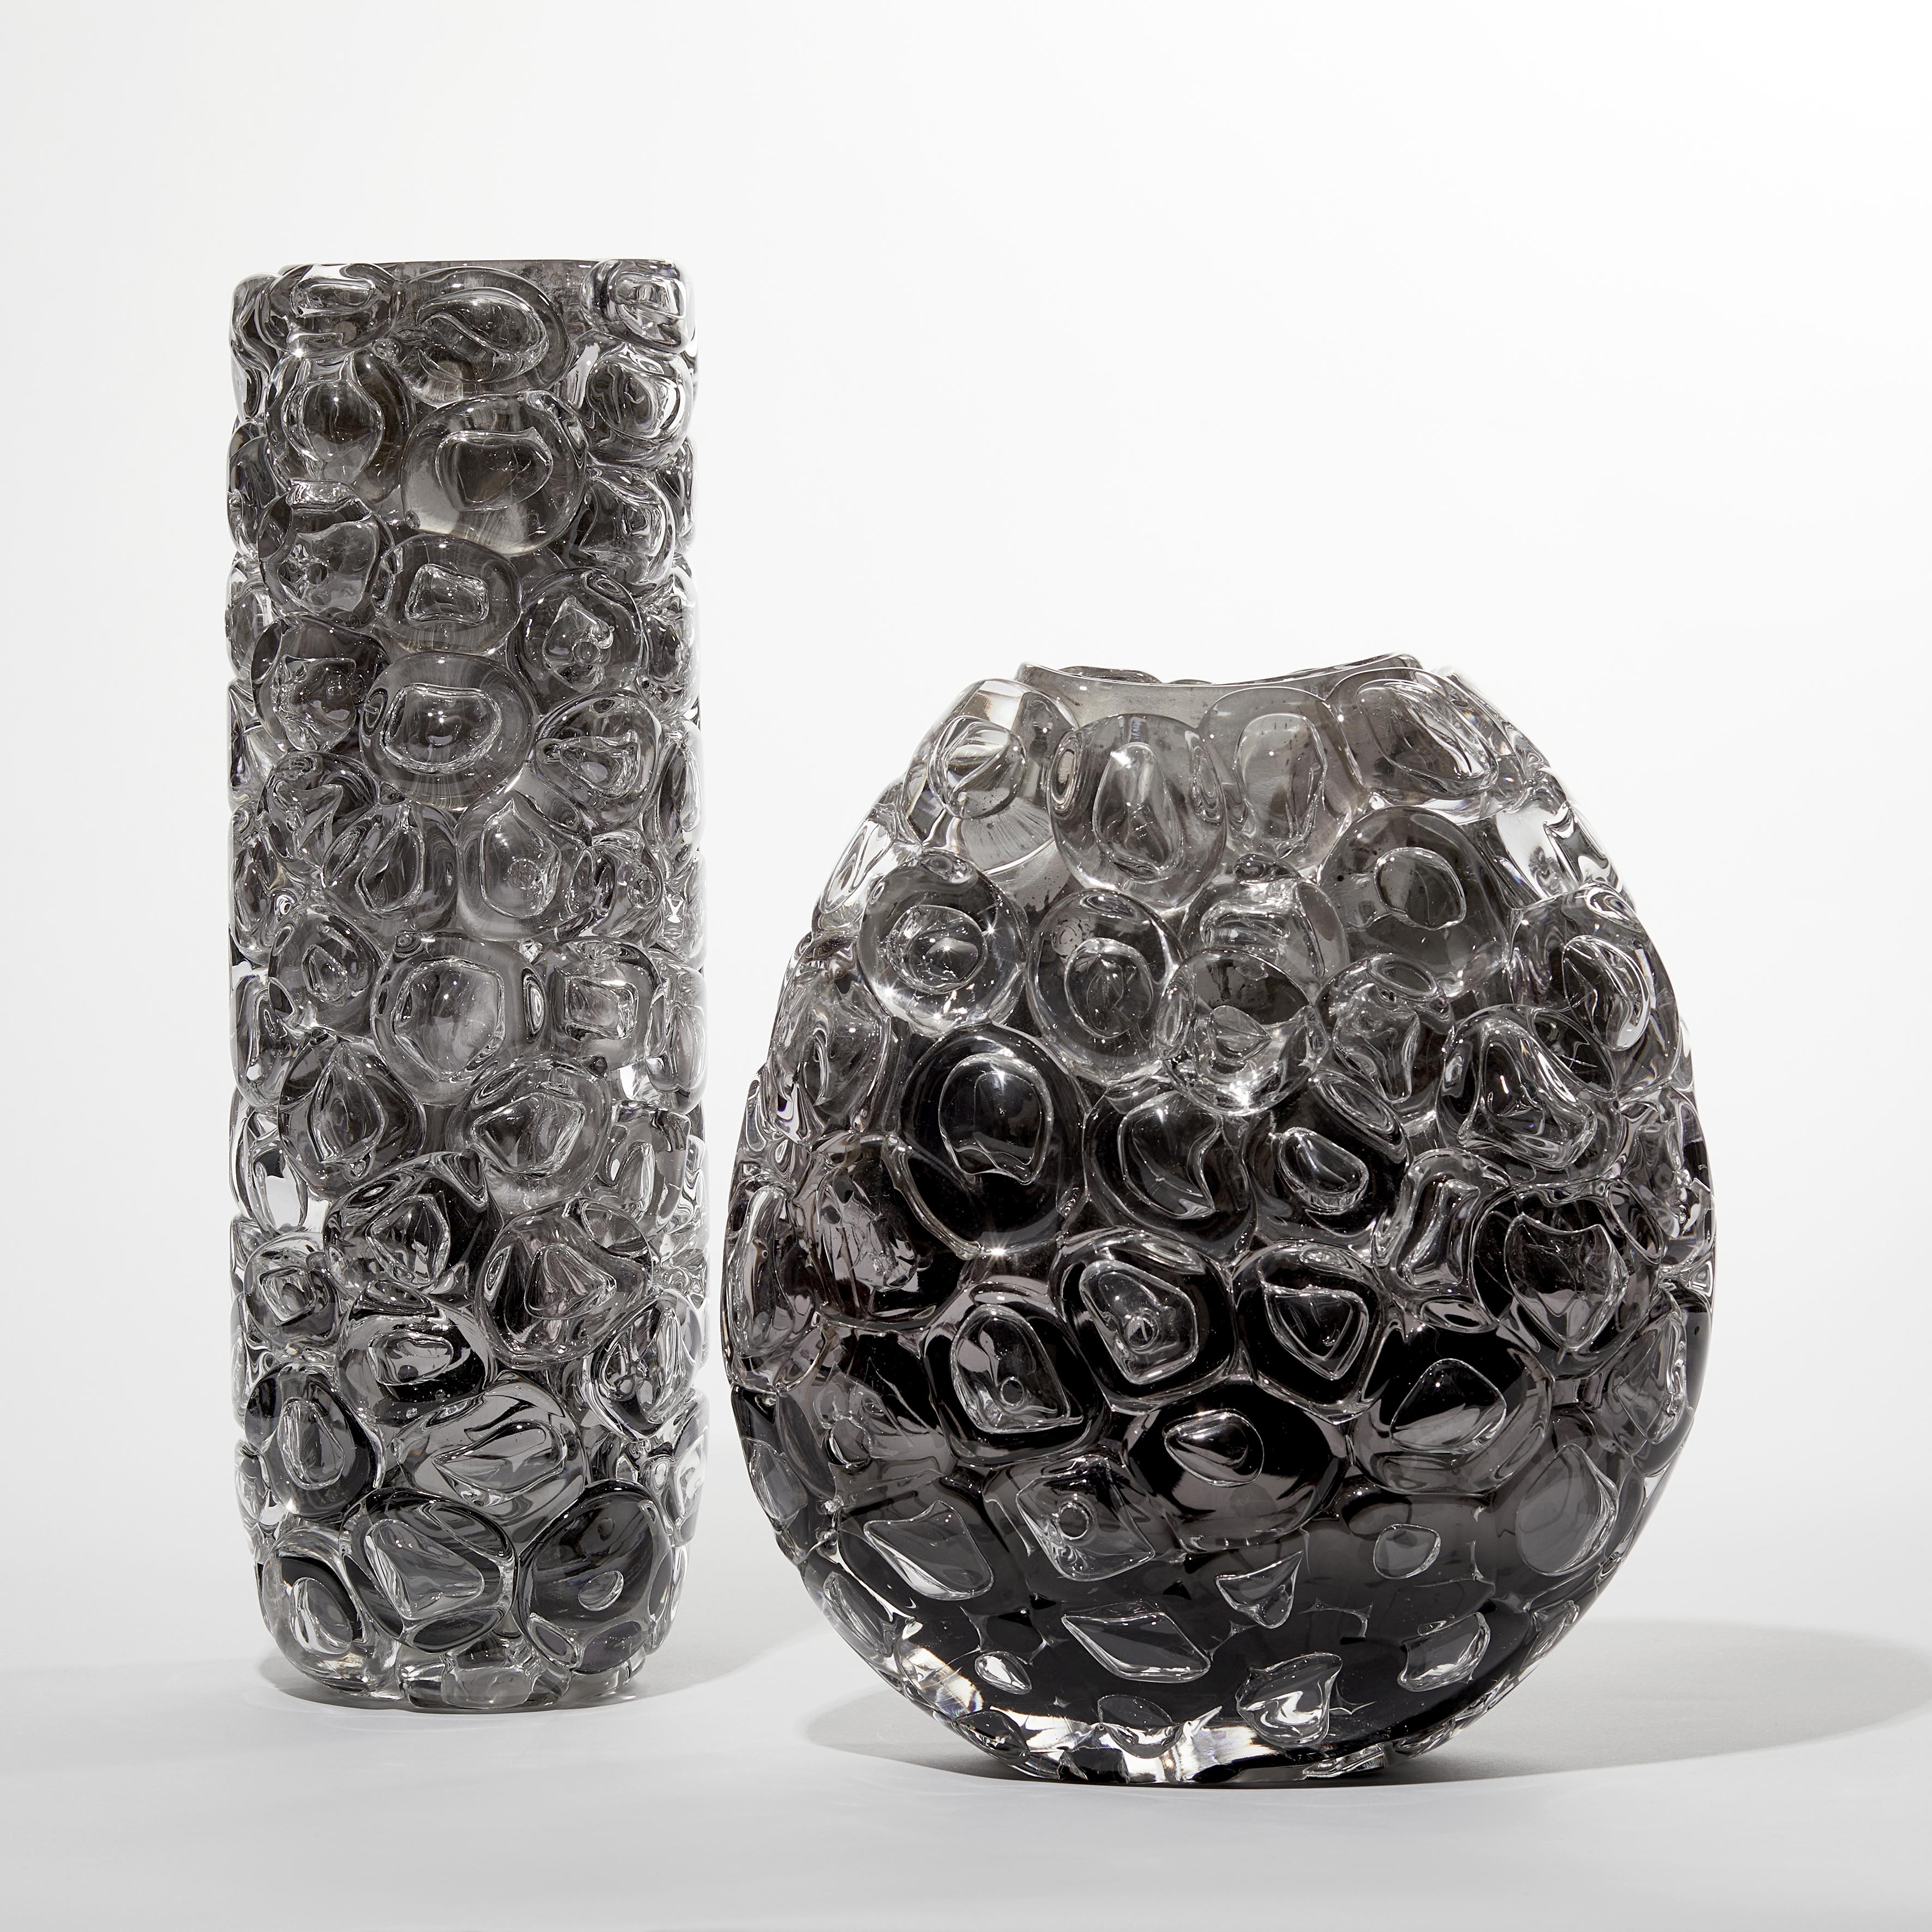 Bubblewrap in Monochrome II, a Silver and Clear Glass Vase by Allister Malcolm 5